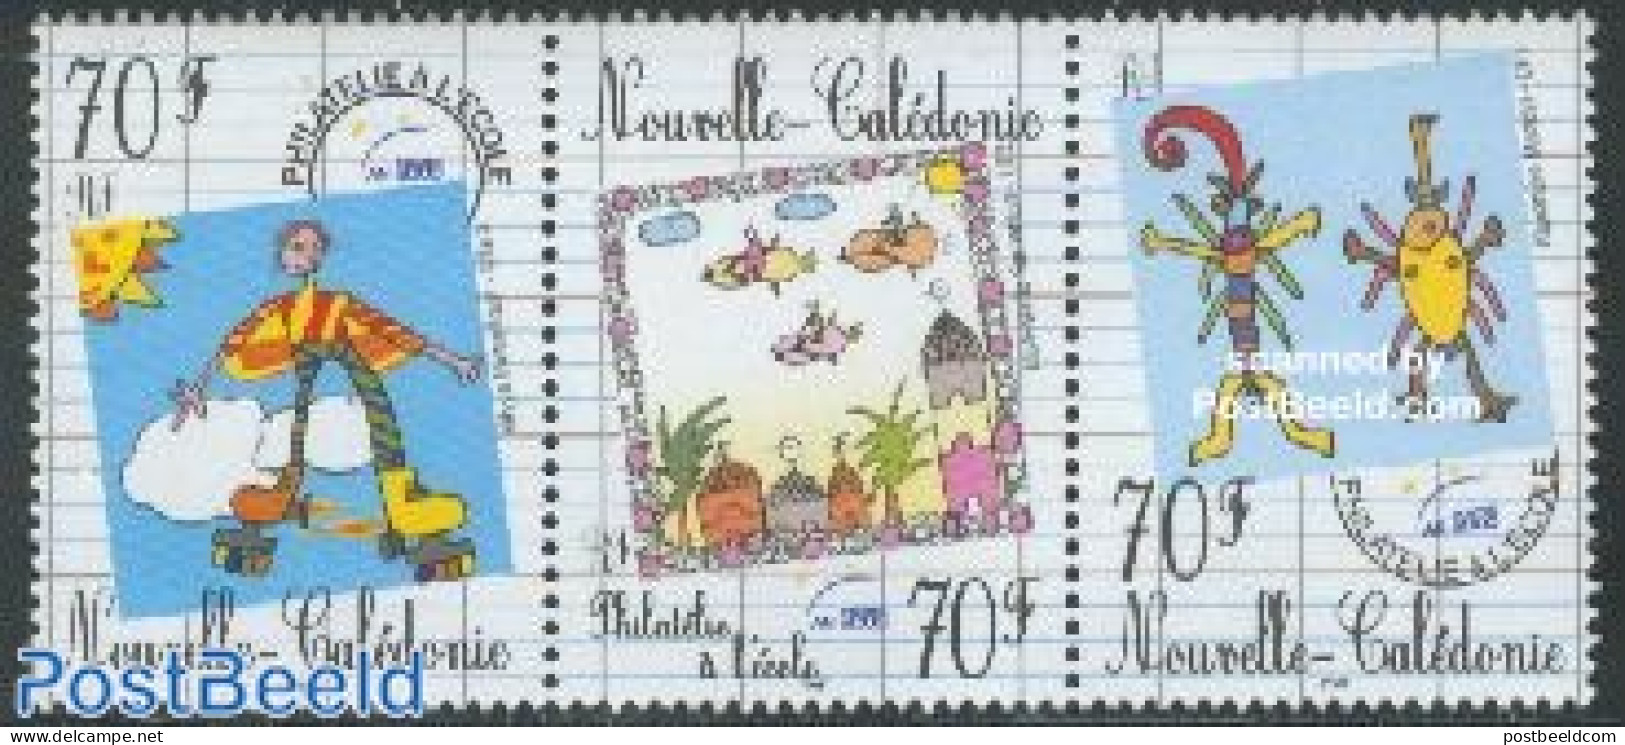 New Caledonia 2000 Philately At School 3v [::], Mint NH, Science - Education - Art - Children Drawings - Unused Stamps